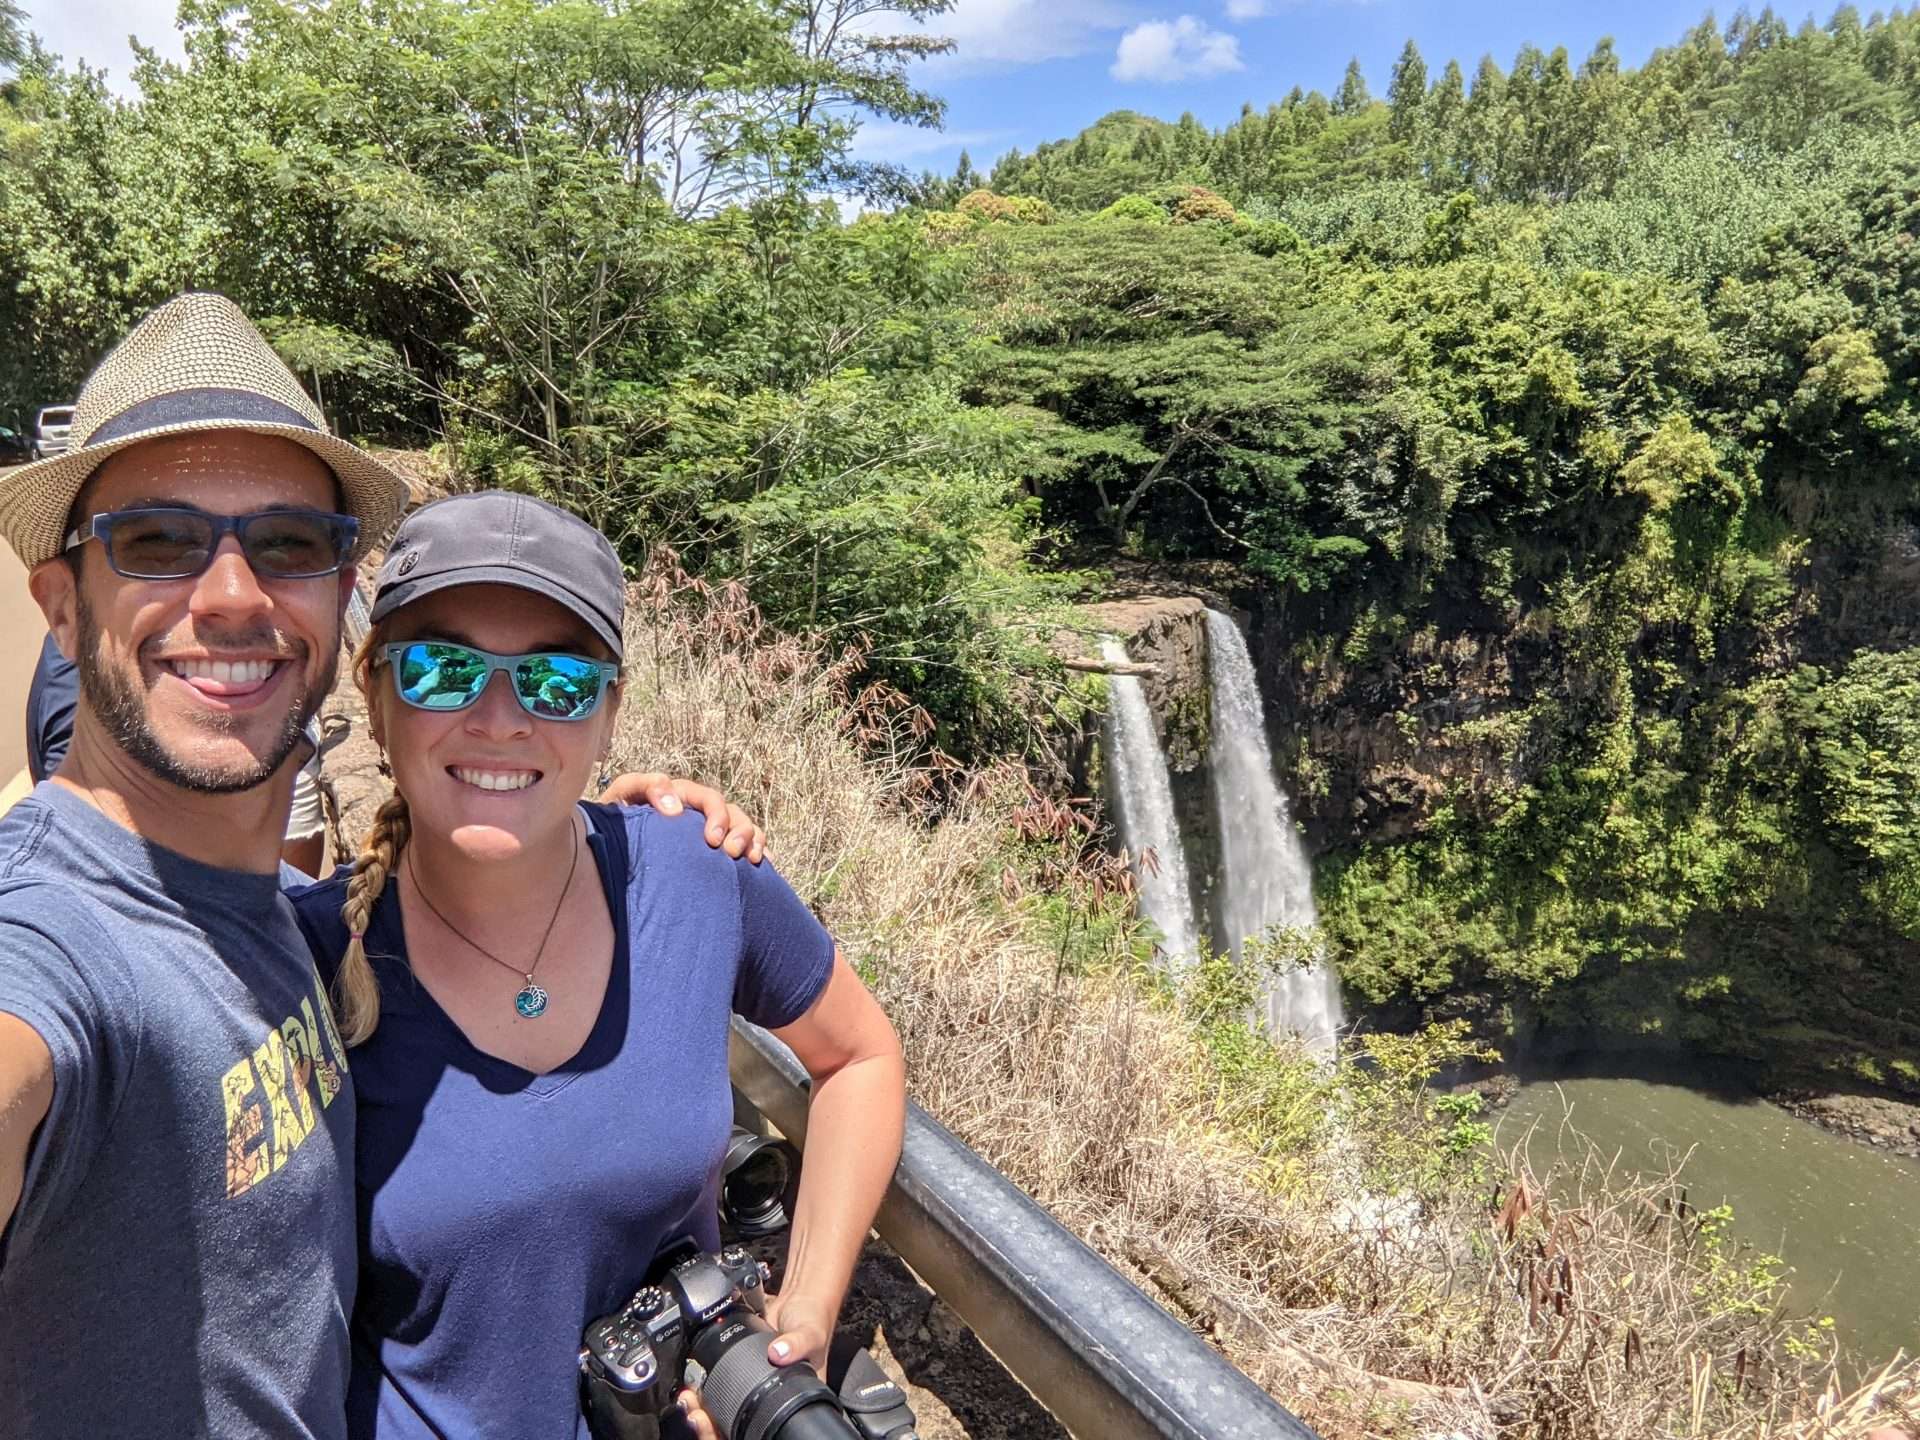 Tom and Caitlin from Mortons on the Move hiking by waterfall in Hawaii